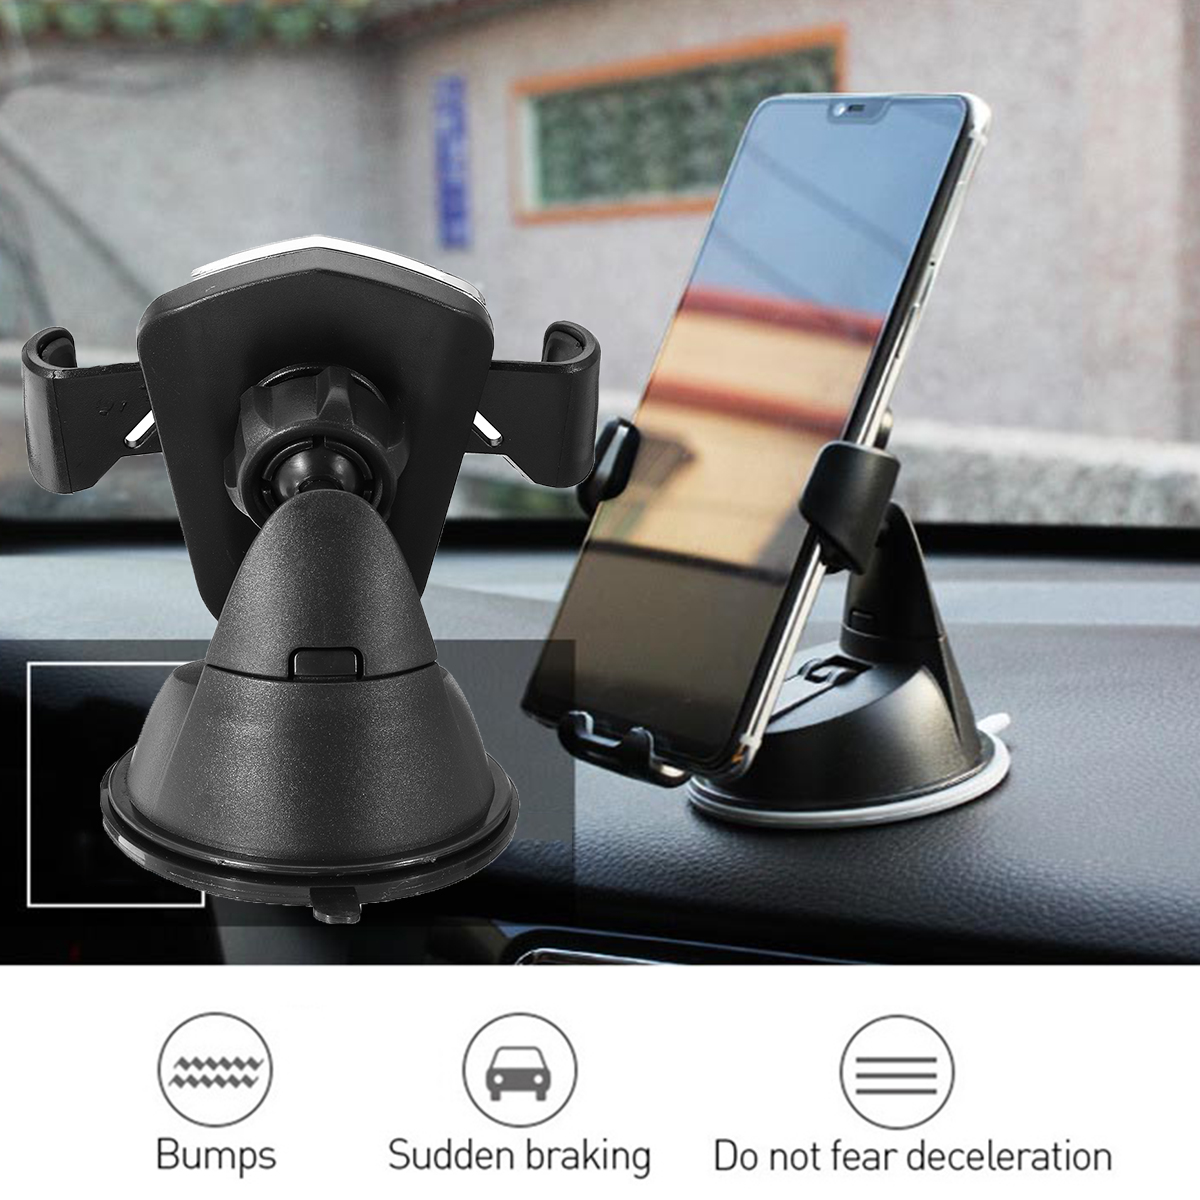 Universal-Gravity-Linkage-Auto-Lock-Car-Air-Vent-Mount-Dashboard-Holder-for-iPhone-Xiaomi-Mobile-Pho-1419383-2